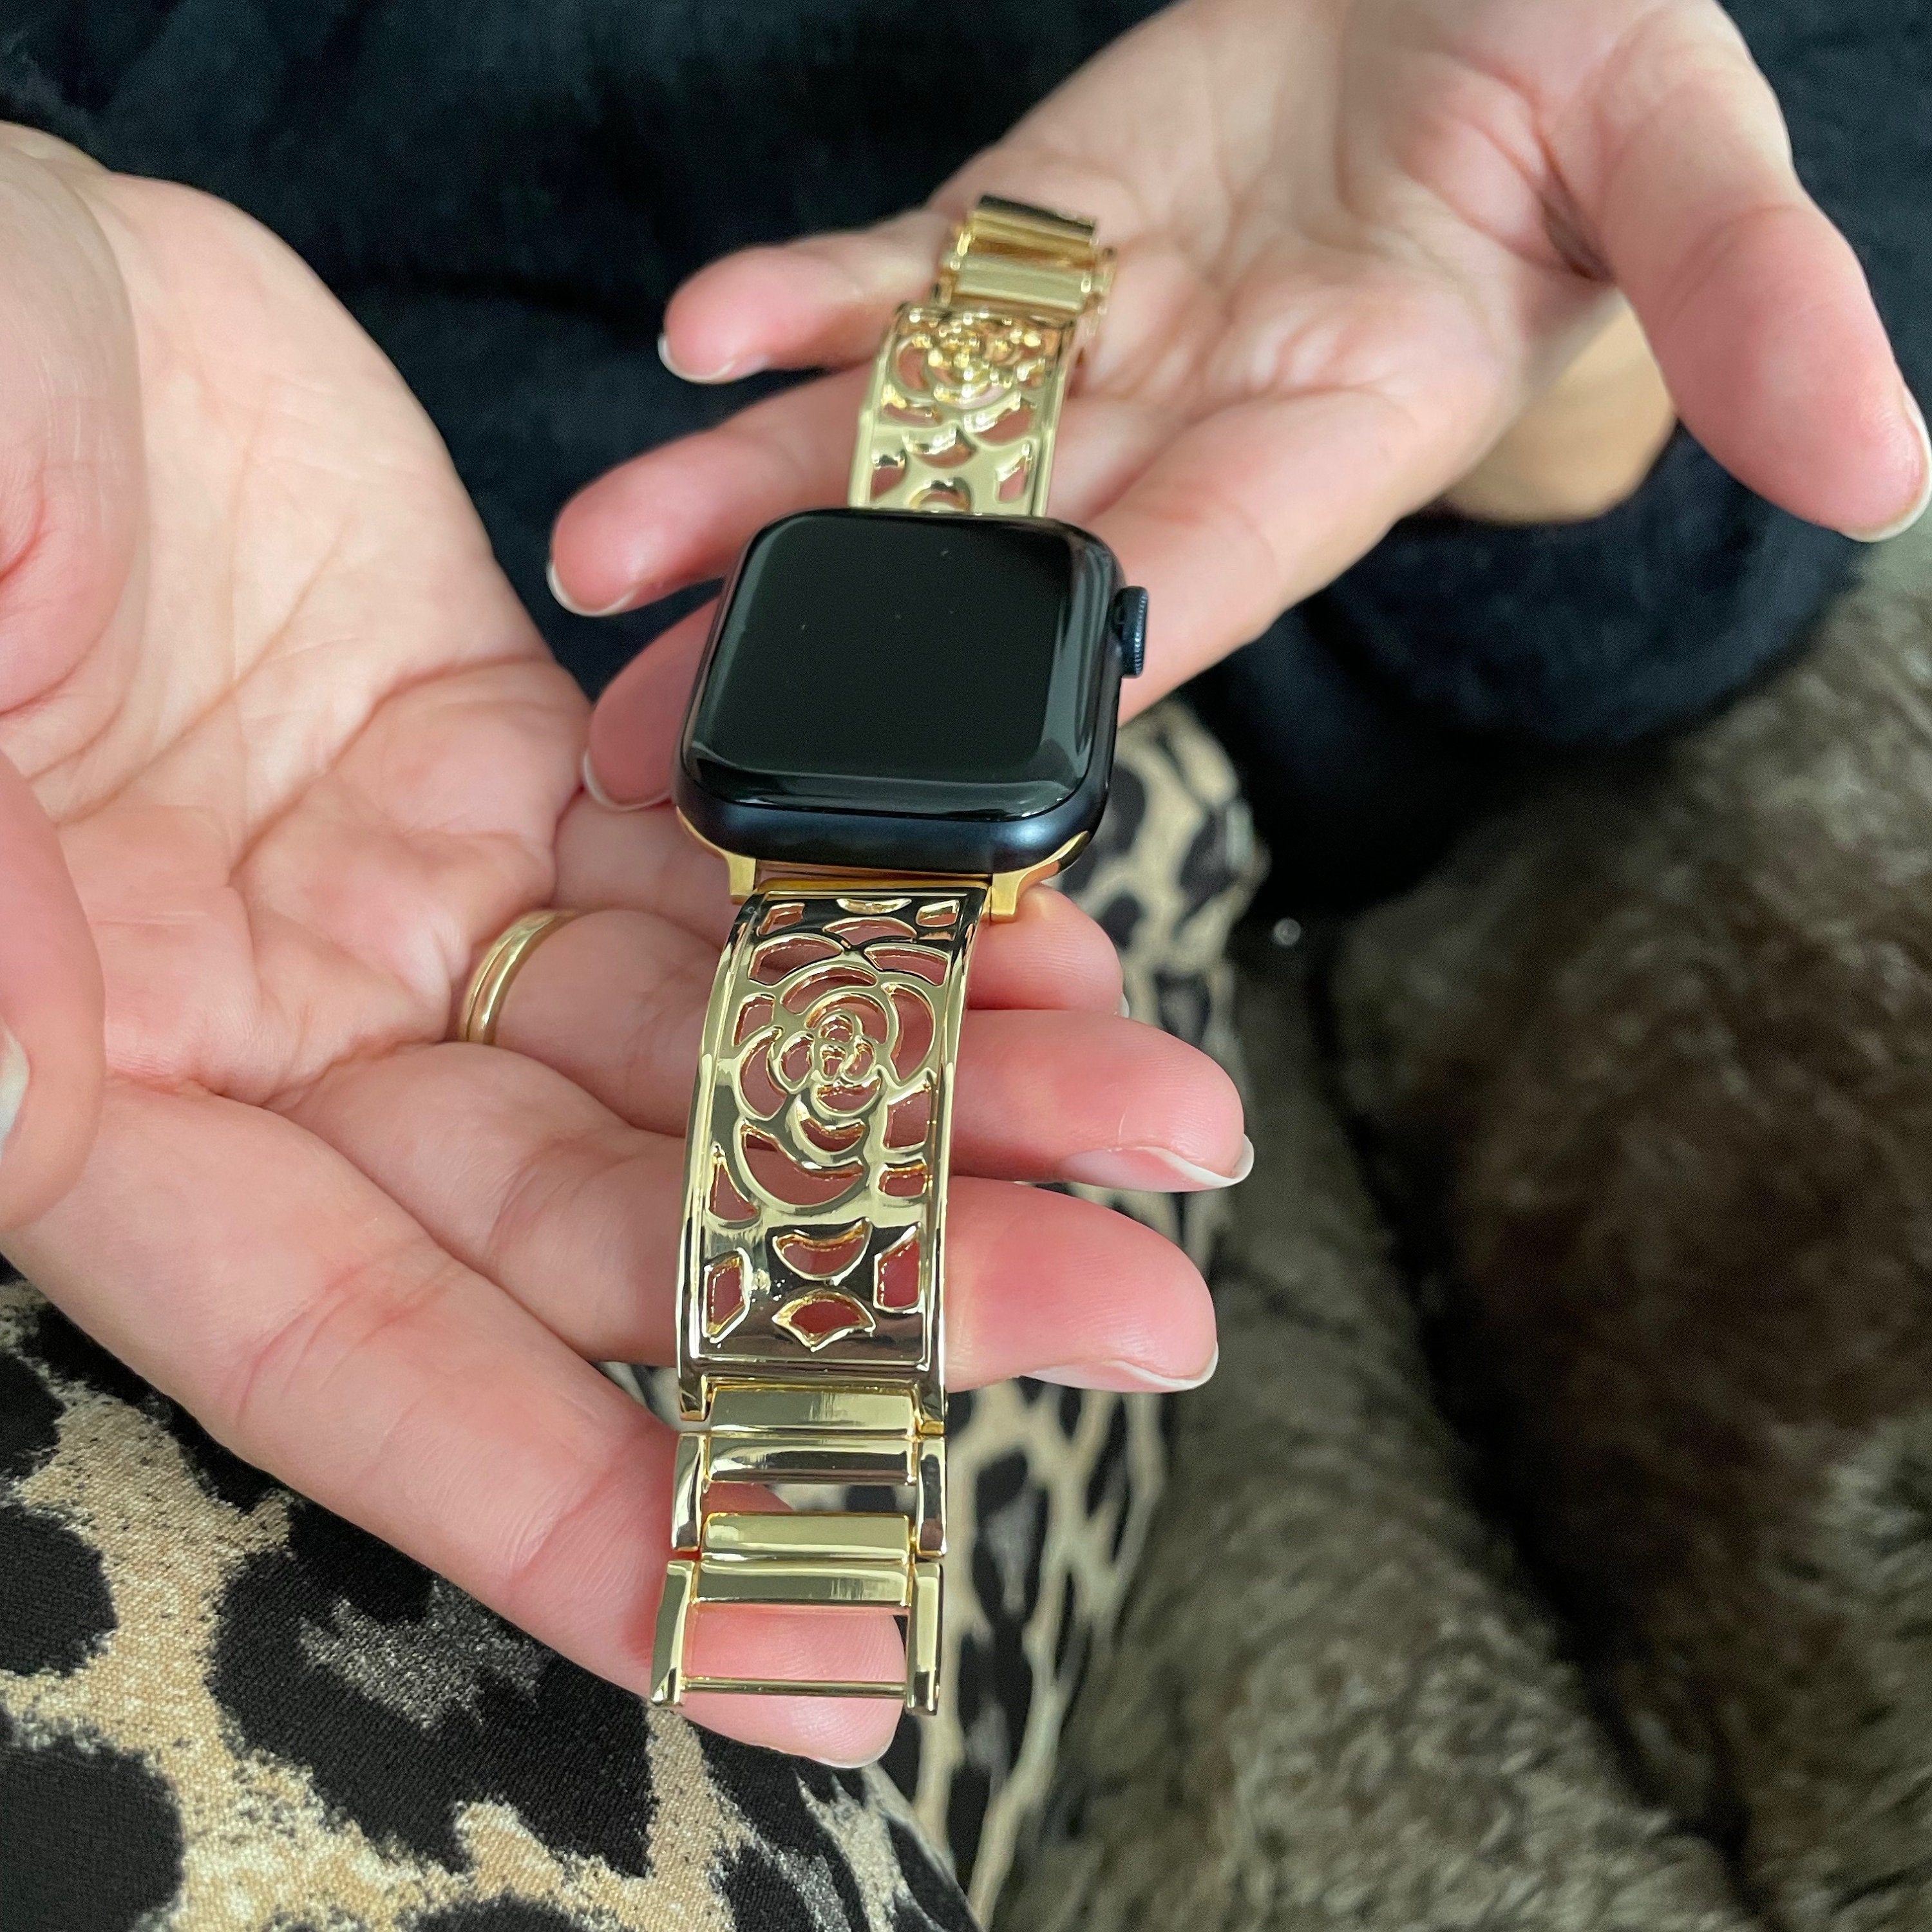 Handmade Louis Vuitton Apple Watch Band The total band length is